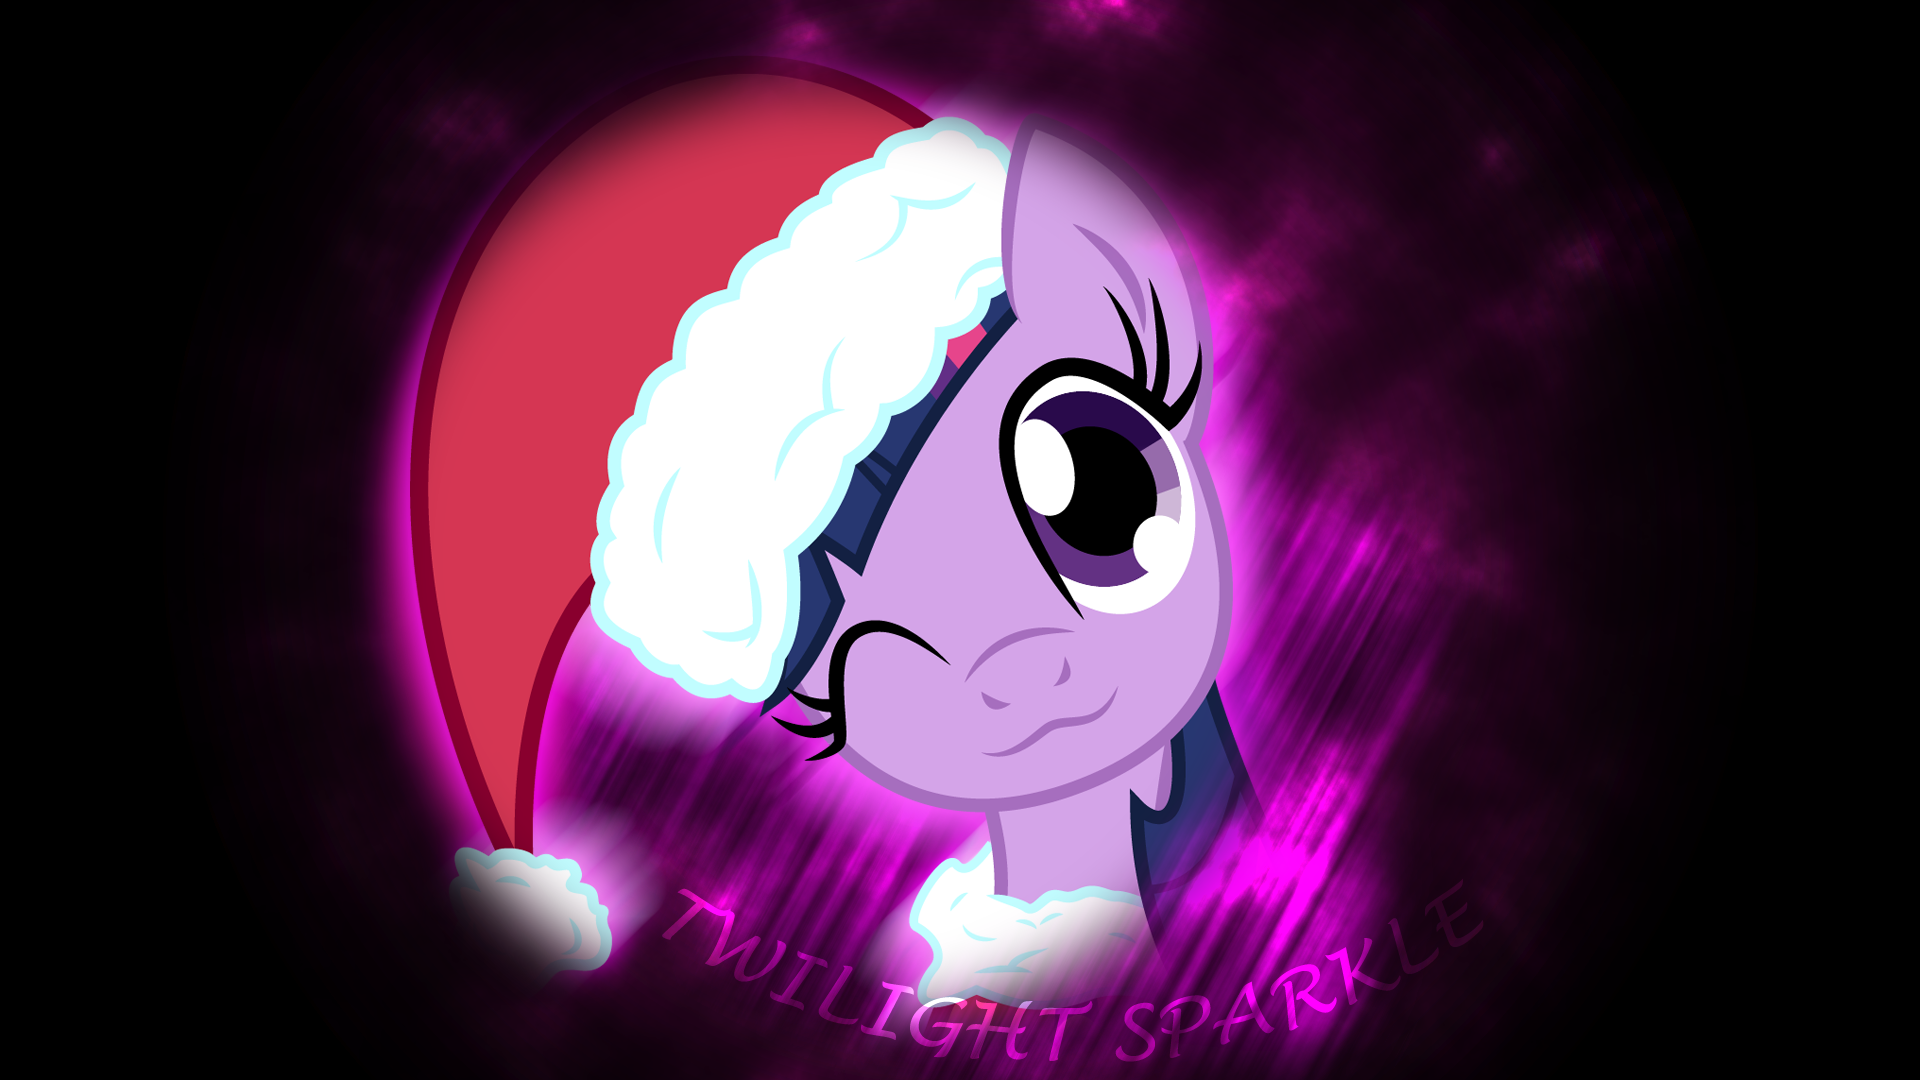 Sparkle Claus wallpaper by LazyPixel